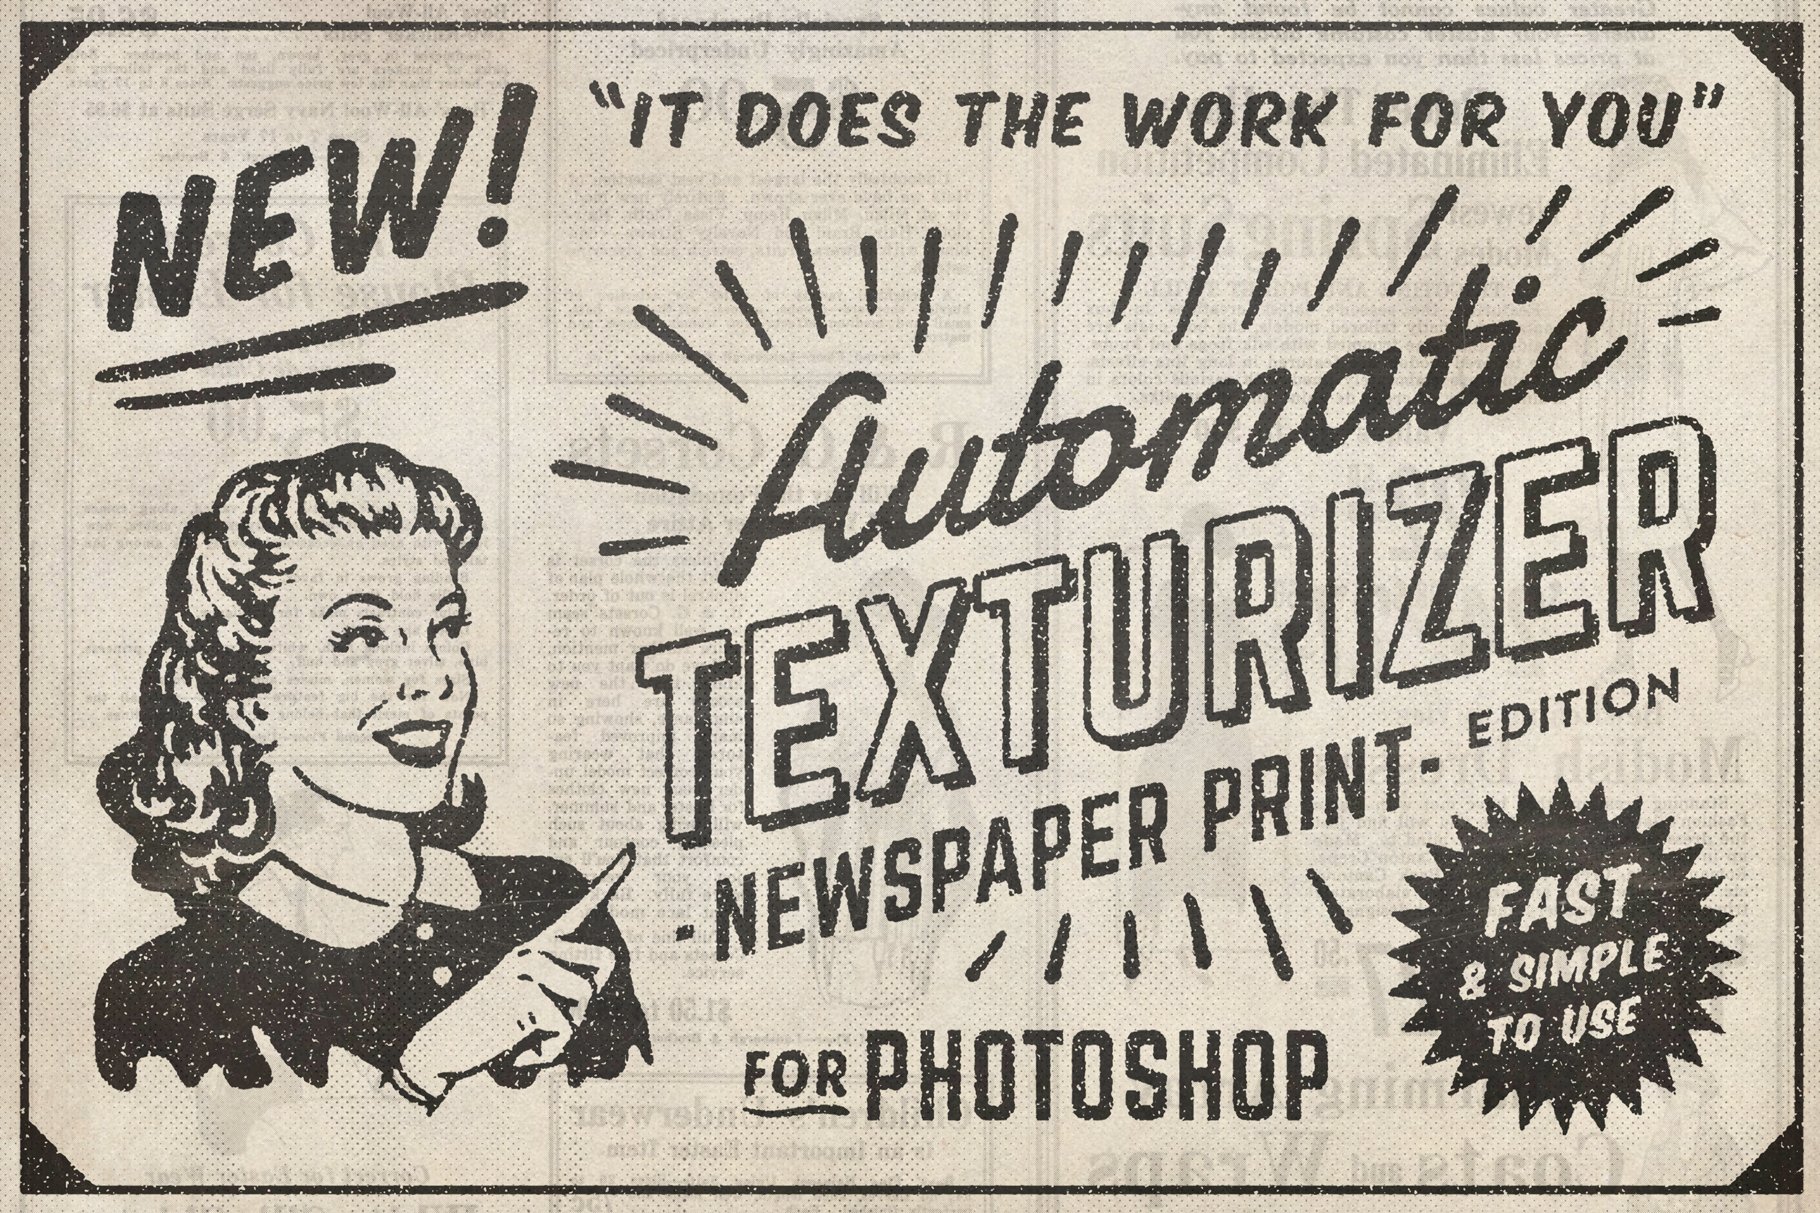 AUTOMATIC TEXTURIZERcover image.